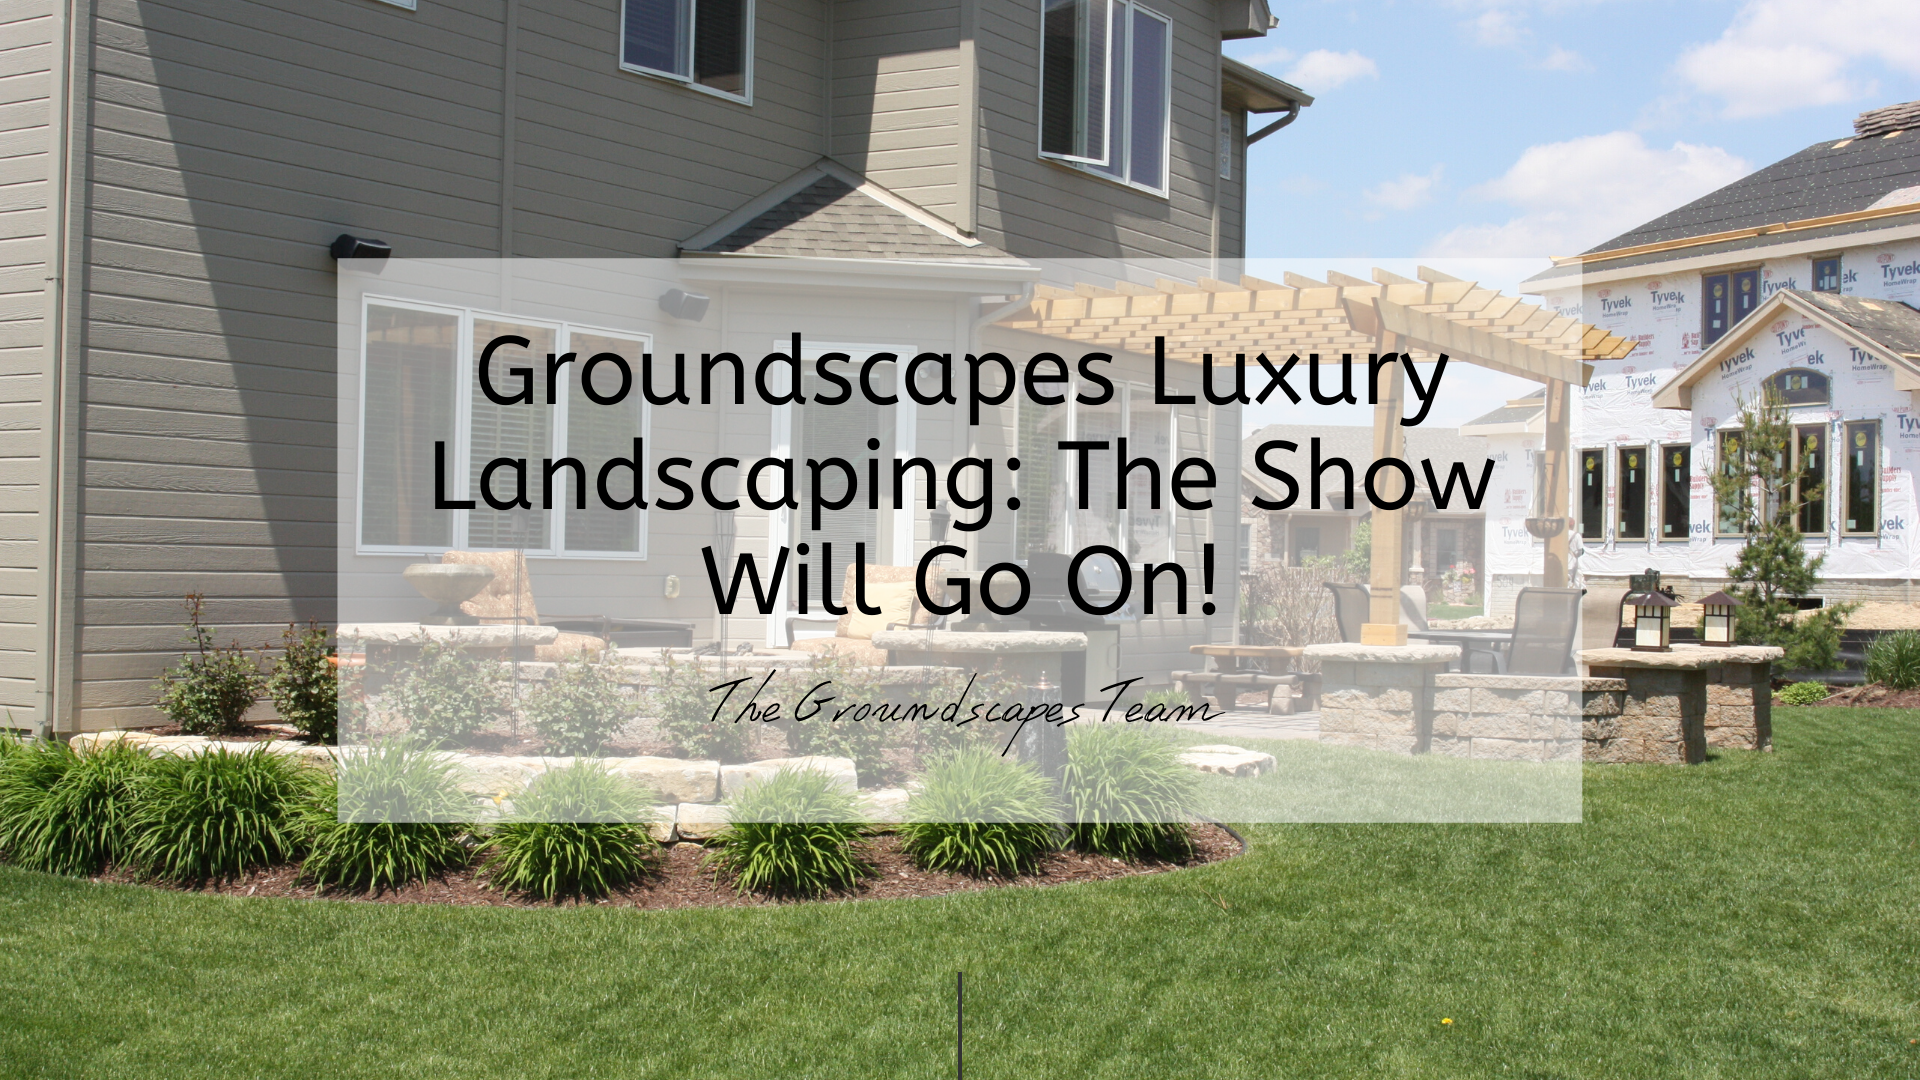 Groundscapes Luxury Landscaping: The Show Will Go On!